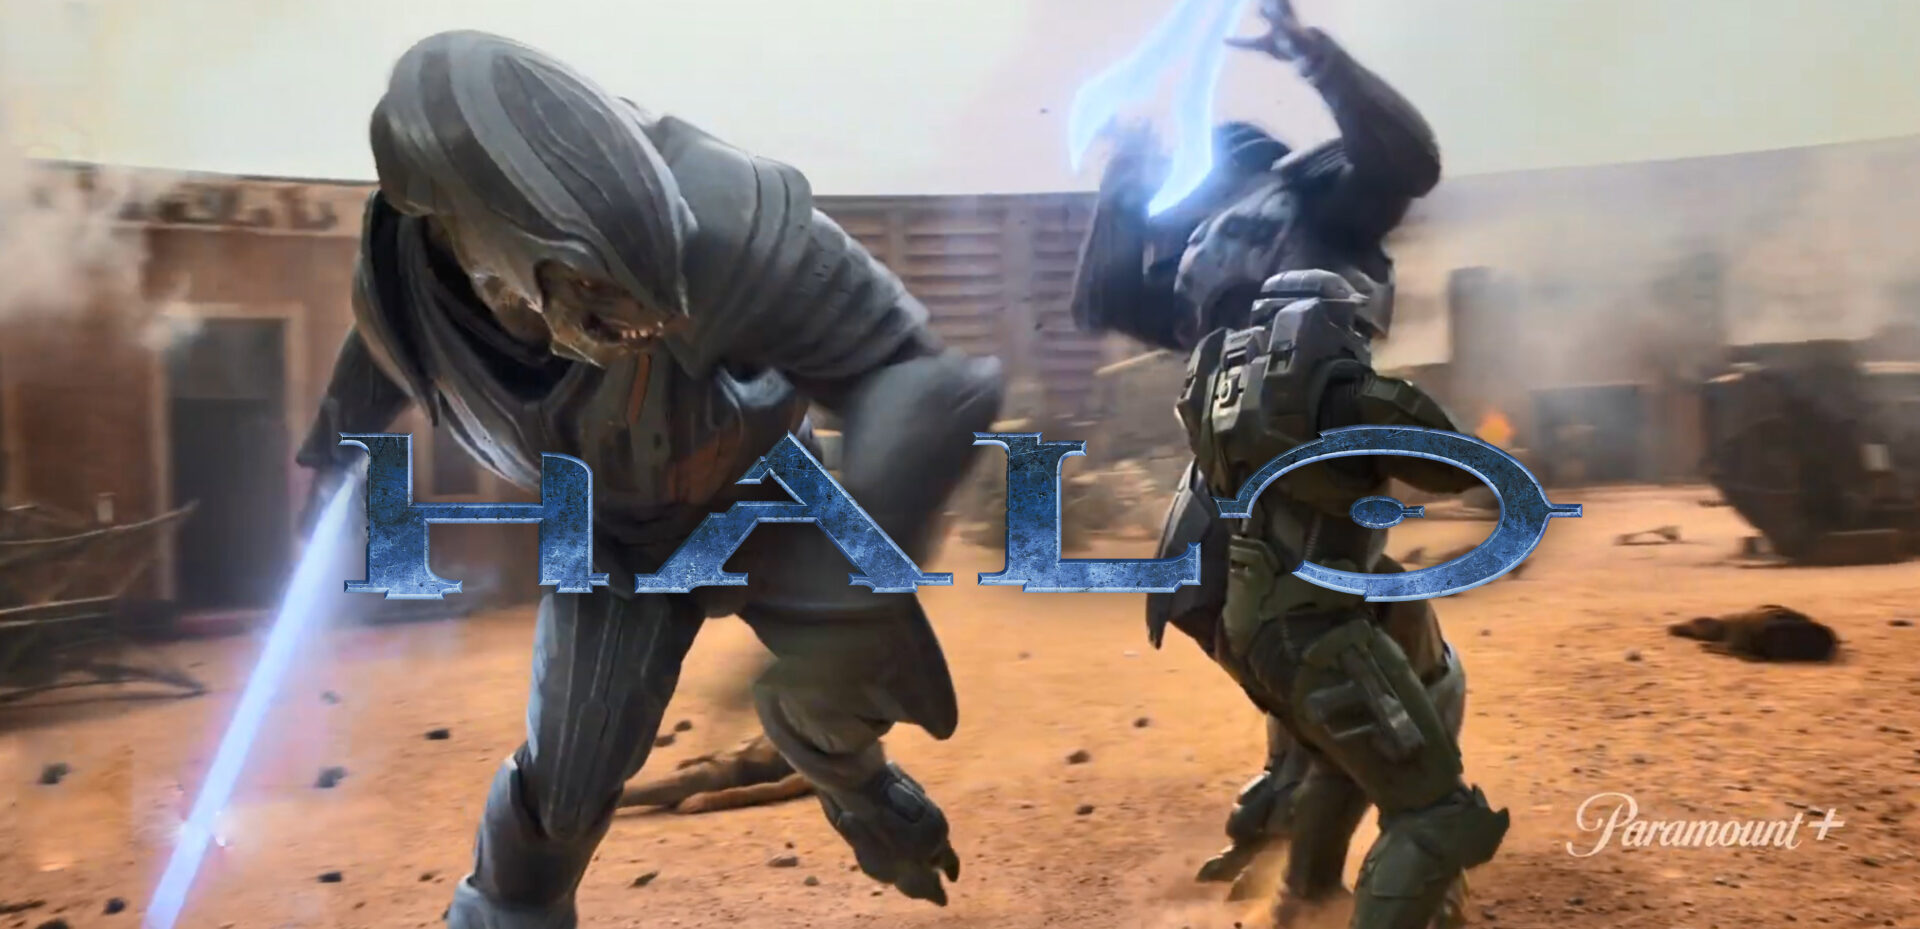 The Halo TV series' first full trailer shows Master Chief in